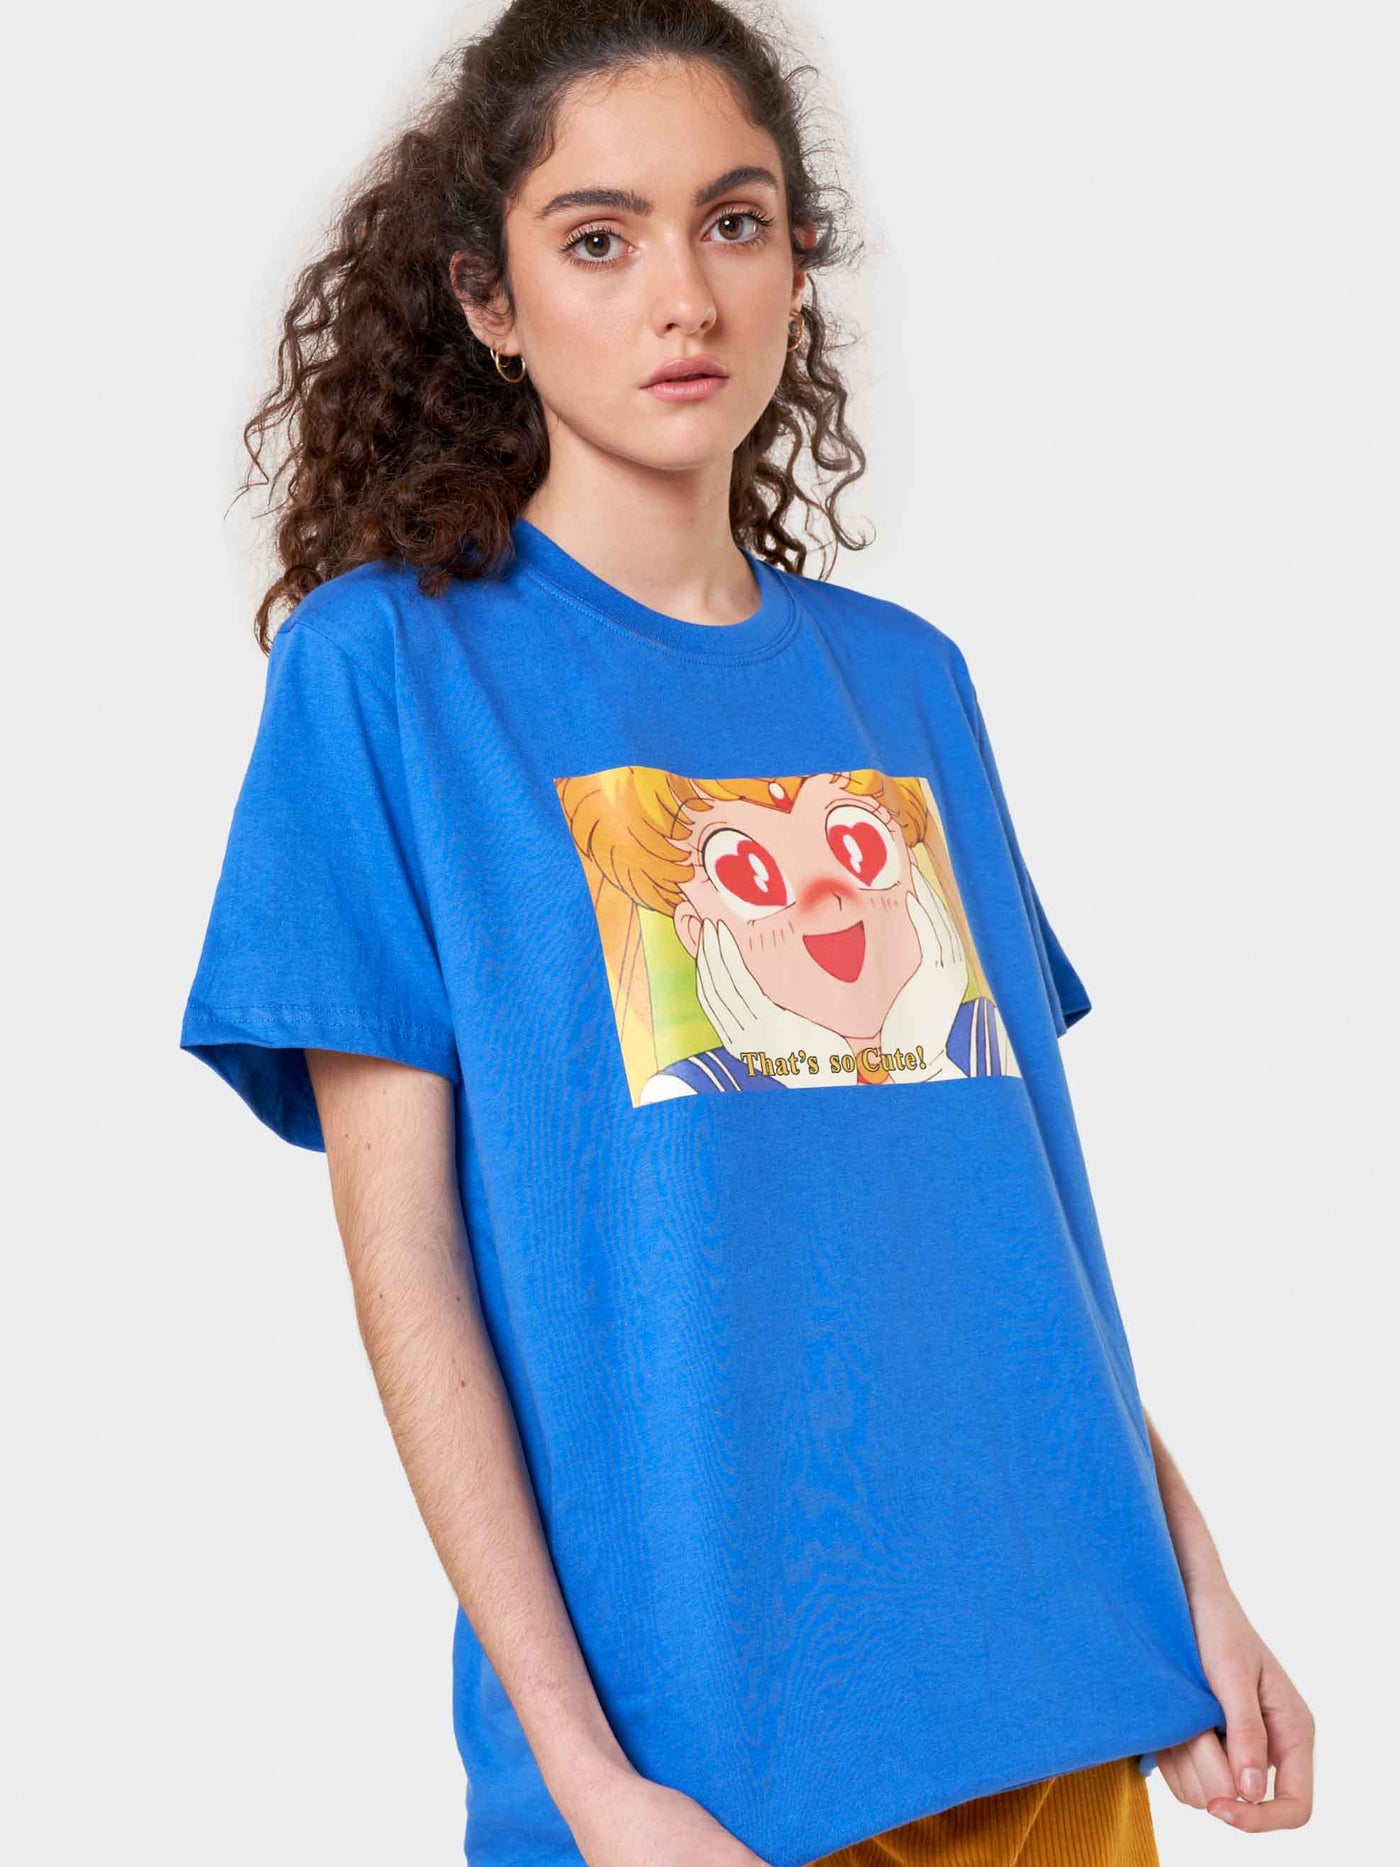 Oversized t-shirt in blue with Sailor Moon Heart Eyes front print